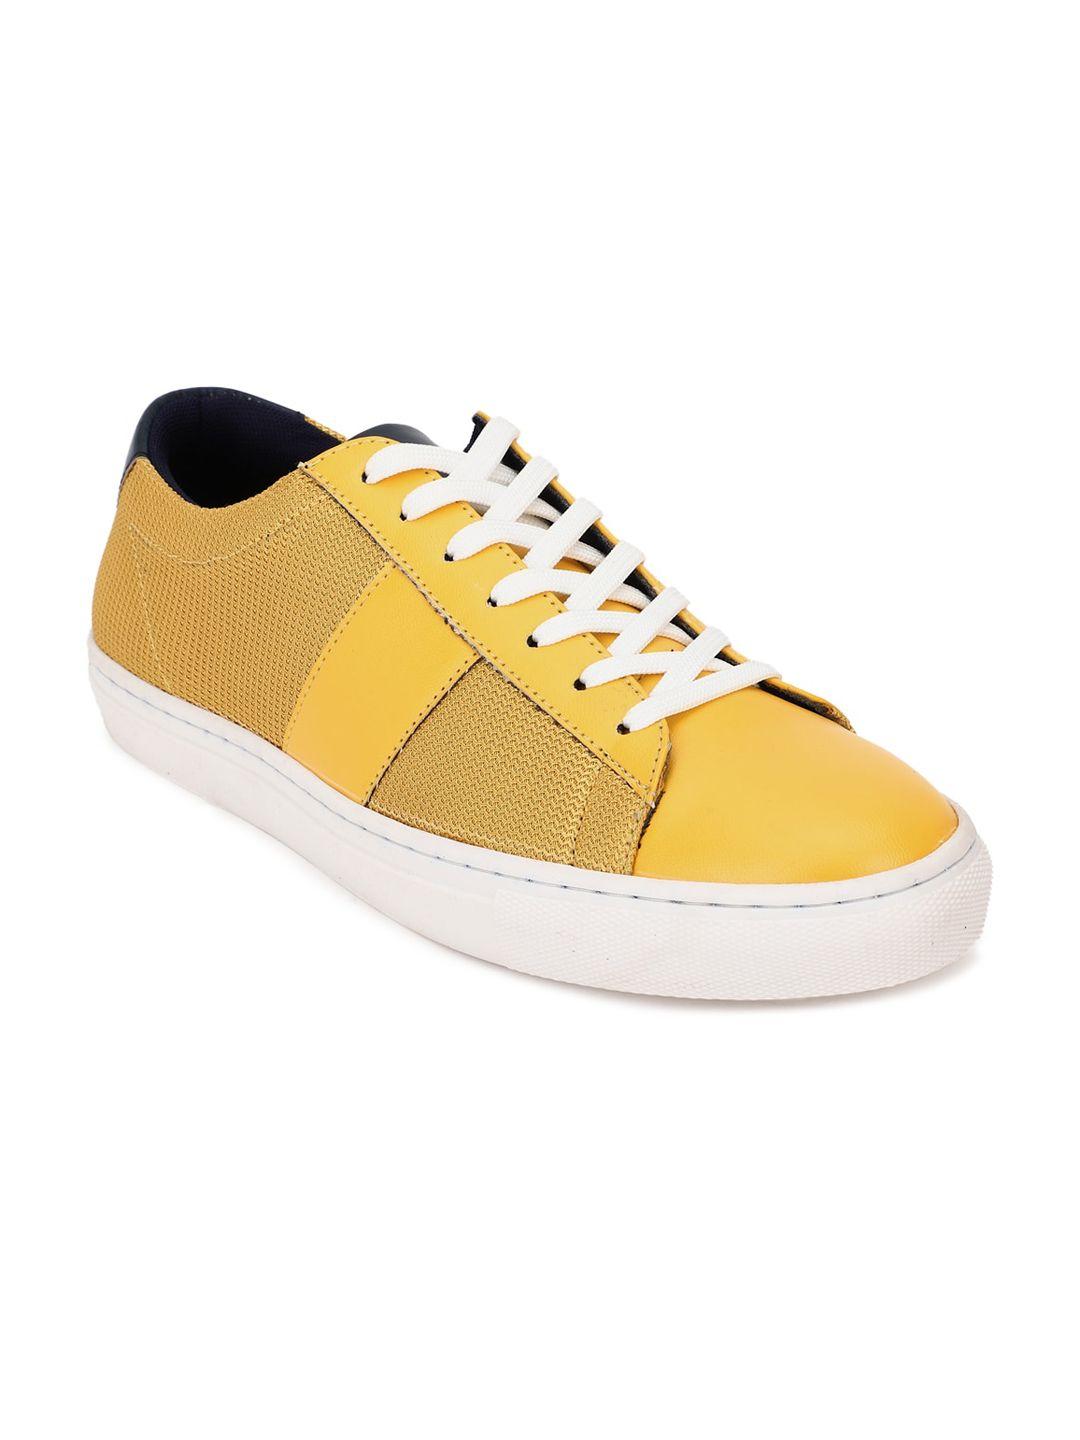 forever 21 women yellow textured sneakers